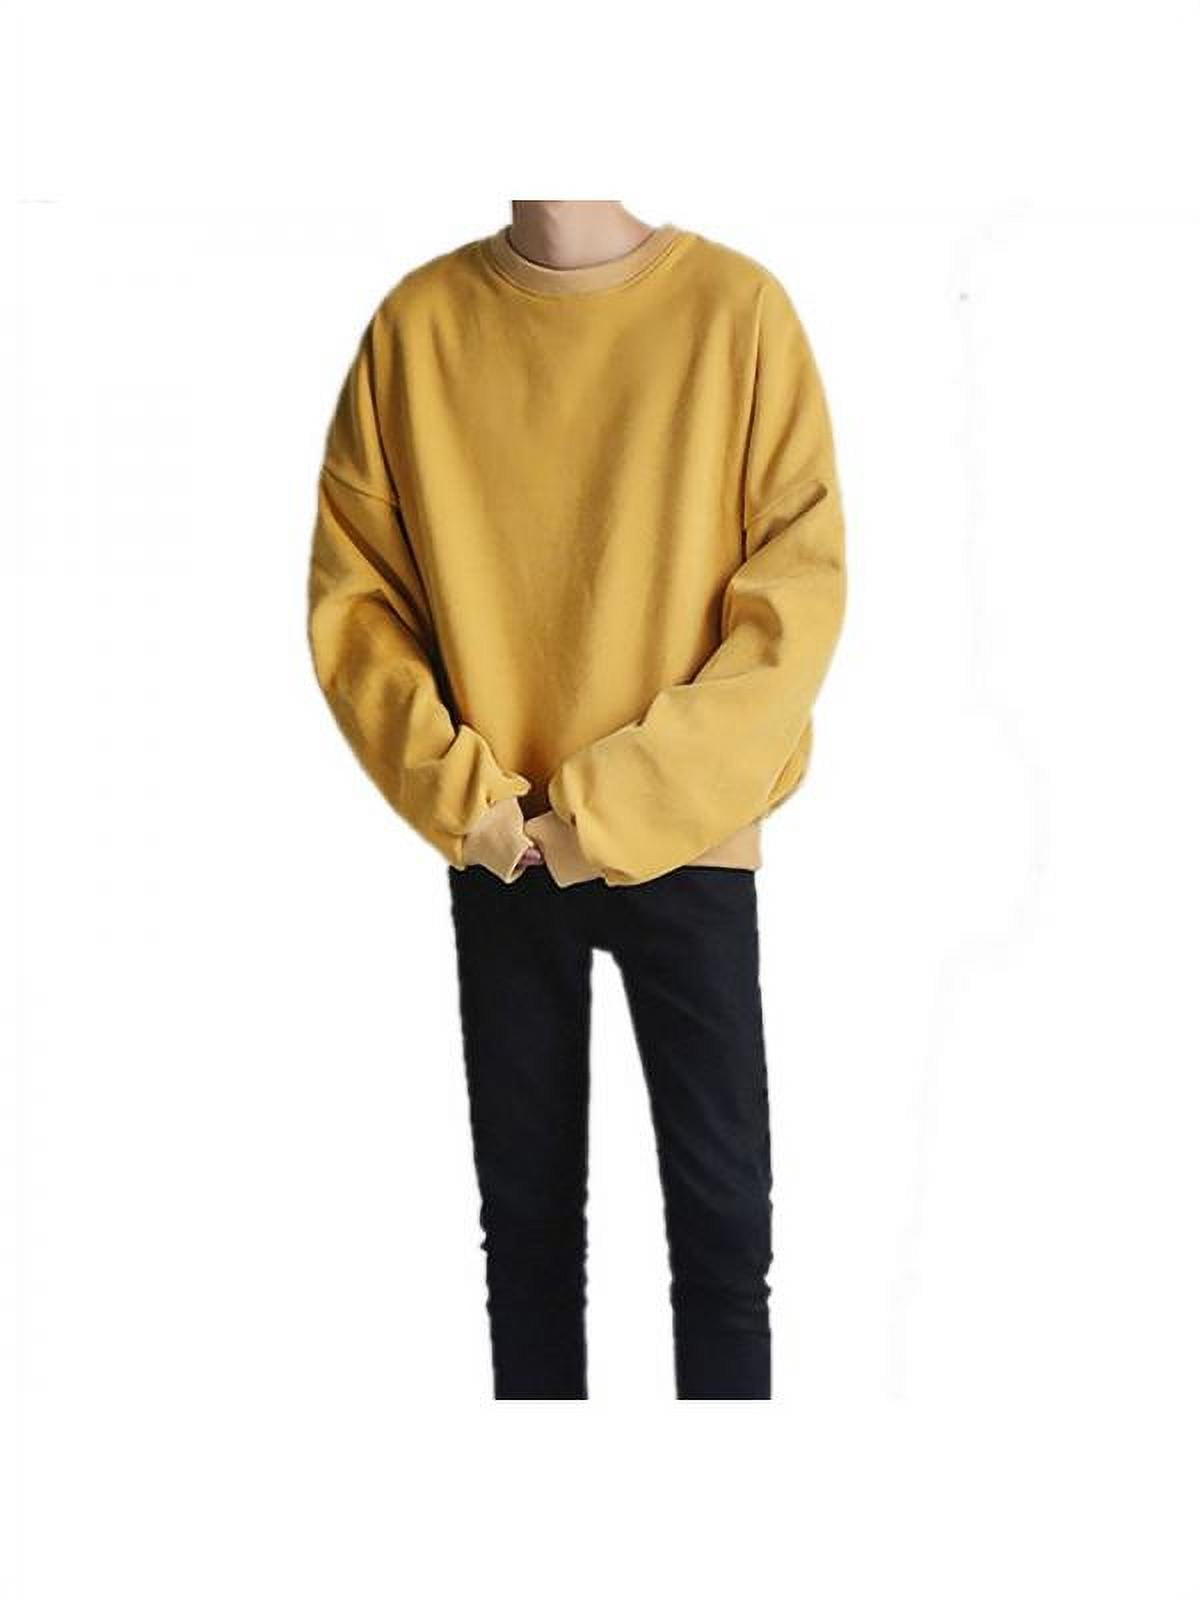 Coolred-Men Plus Size Leisure Pullover Stitch Crew Neck Long Sleeve Tees Top